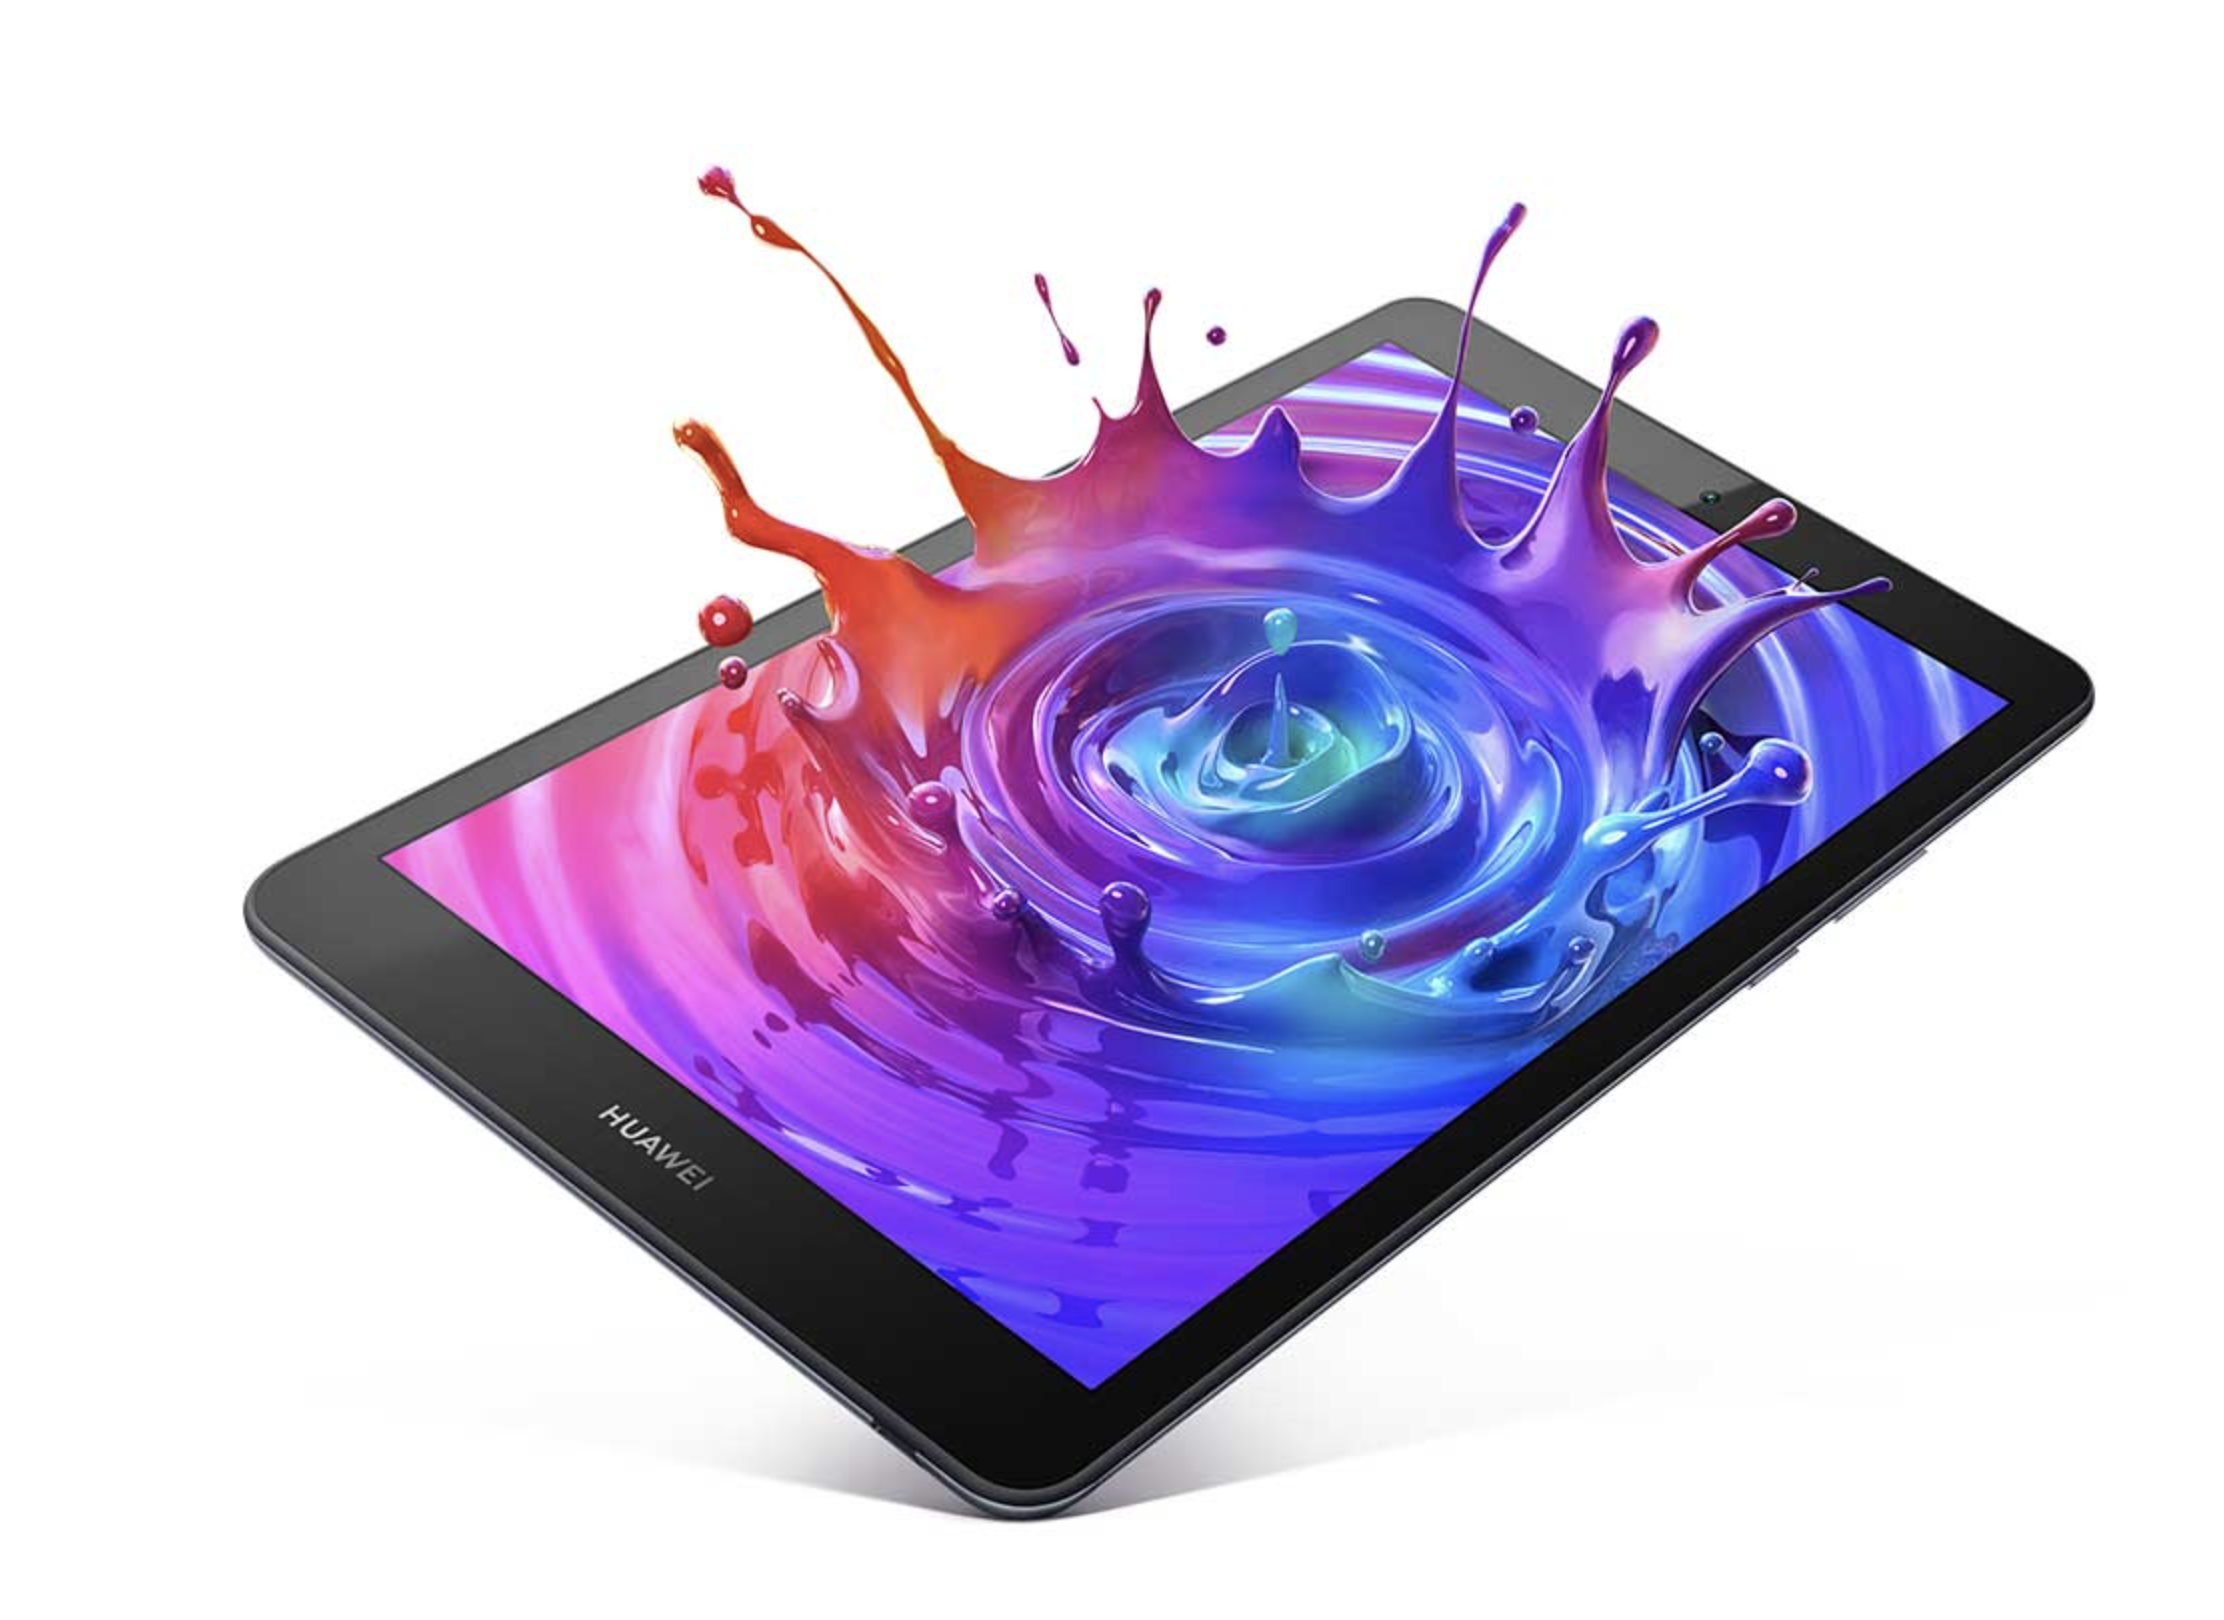 Huawei MediaPad M5 Lite 8 Inch Android 9.0 Tablet with Full HD Display